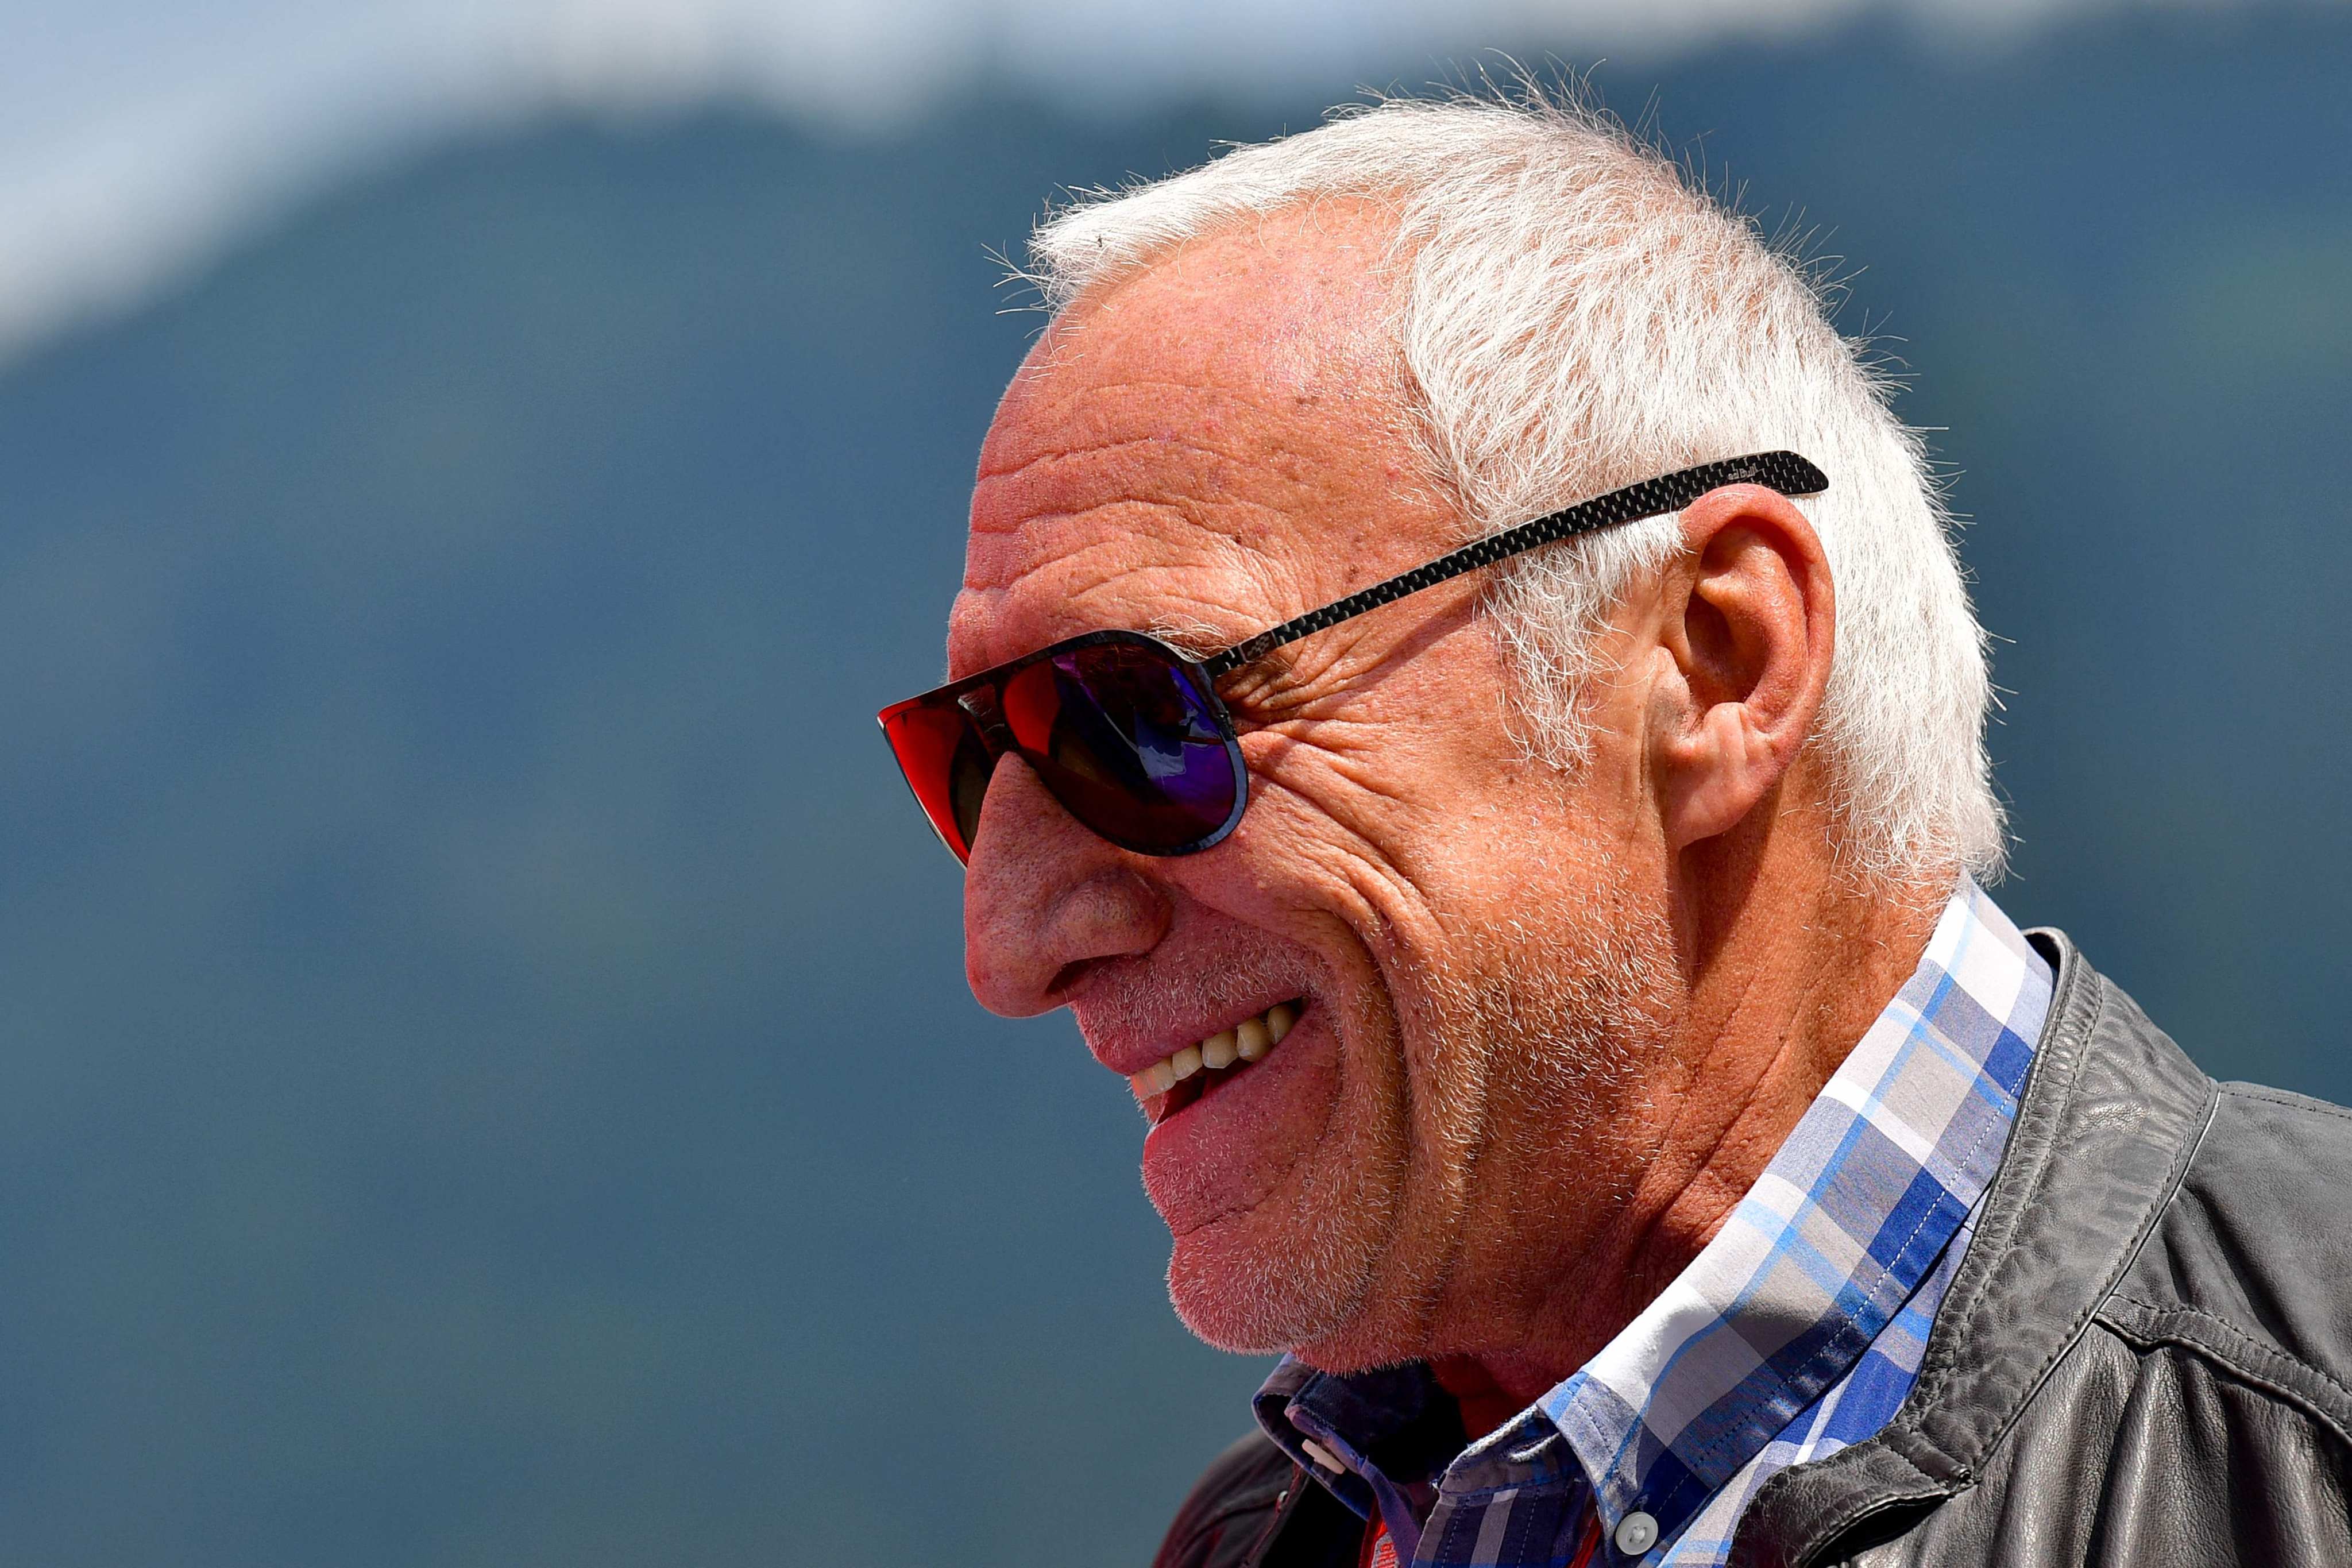 Red Bull team owner, Dietrich Mateschitz, a giant in the world of energy drinks and founder of the Formula One team and a sporting empire has died aged 78. Photo: AFP